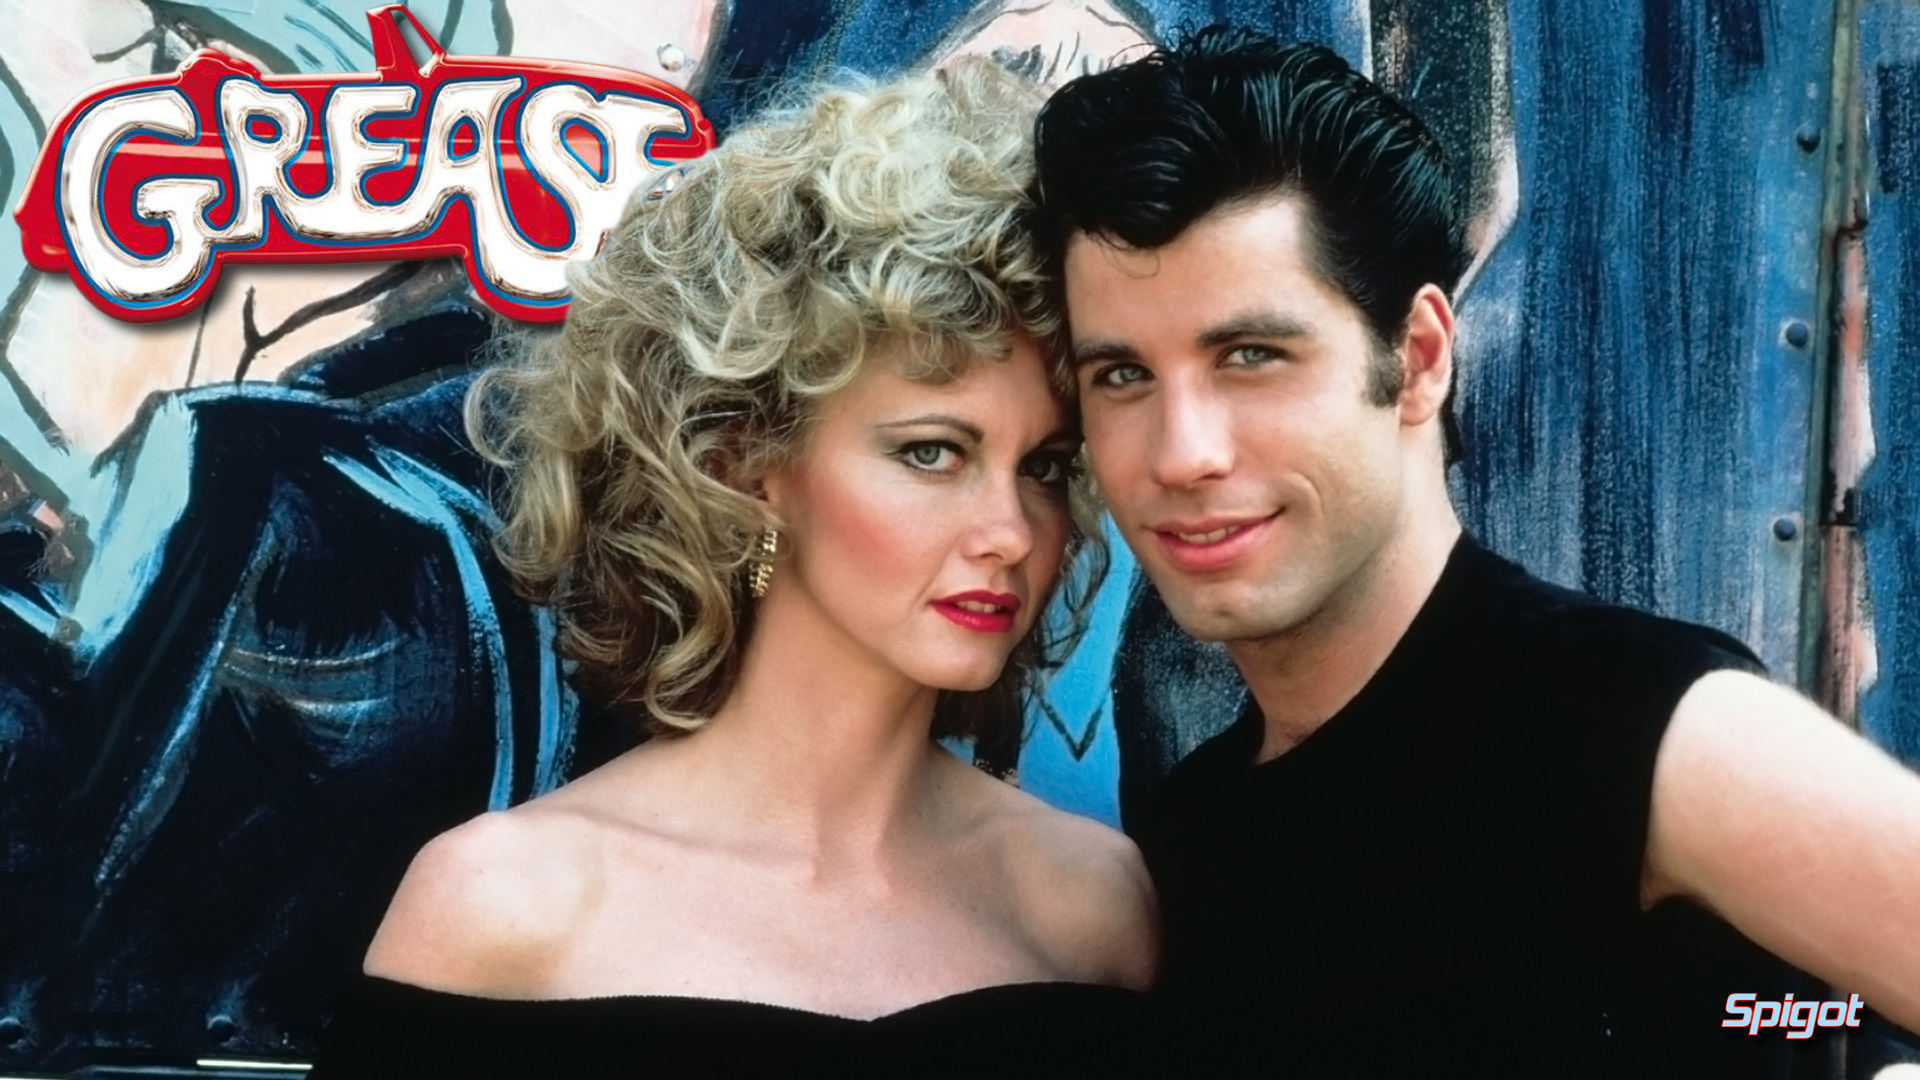 Images of Grease | 1920x1080